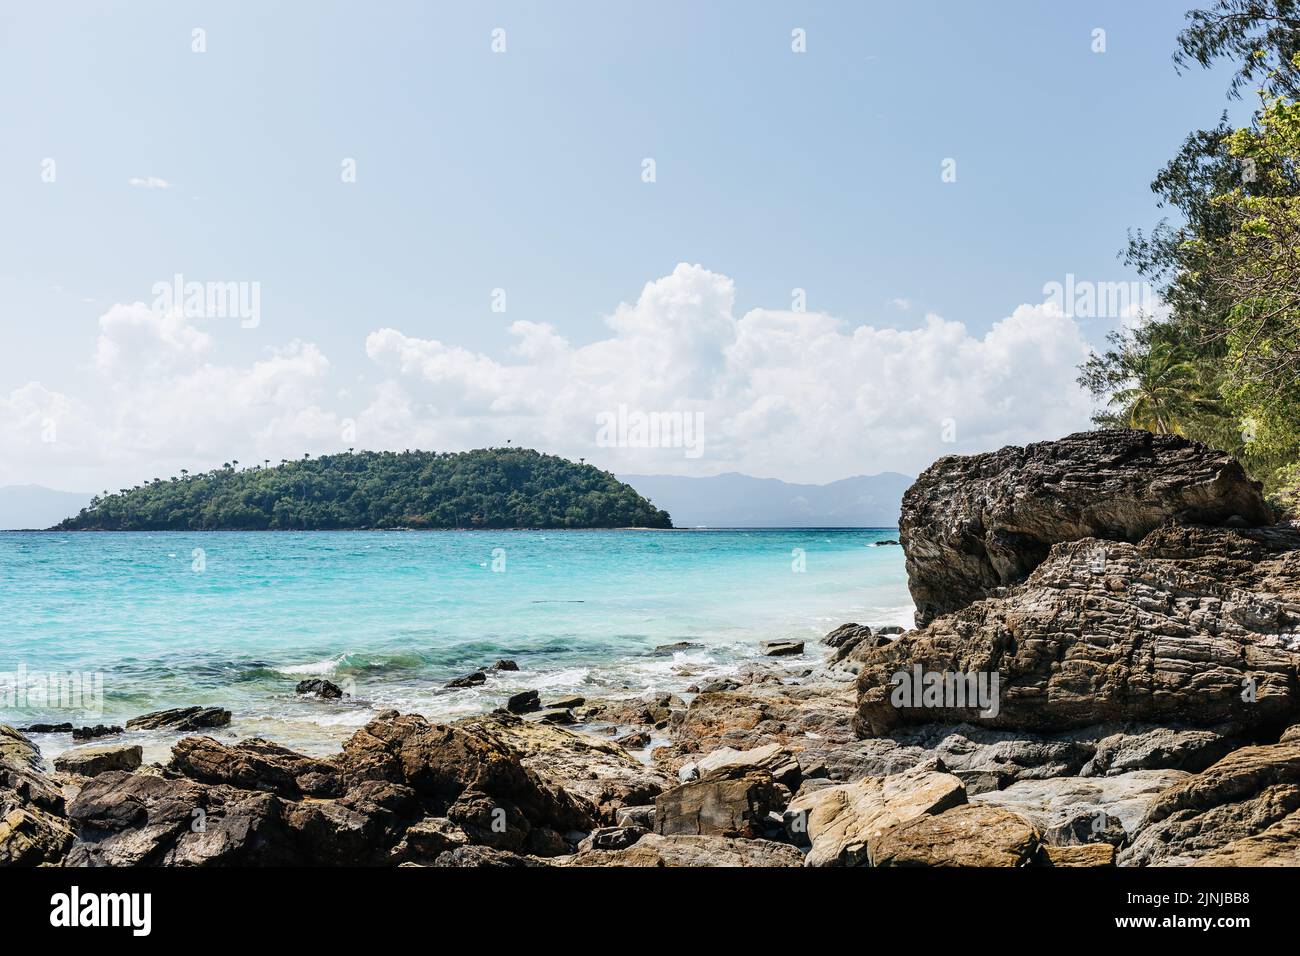 A scenery of the empty tranquil beach in Romblon, the Philippines Stock Photo